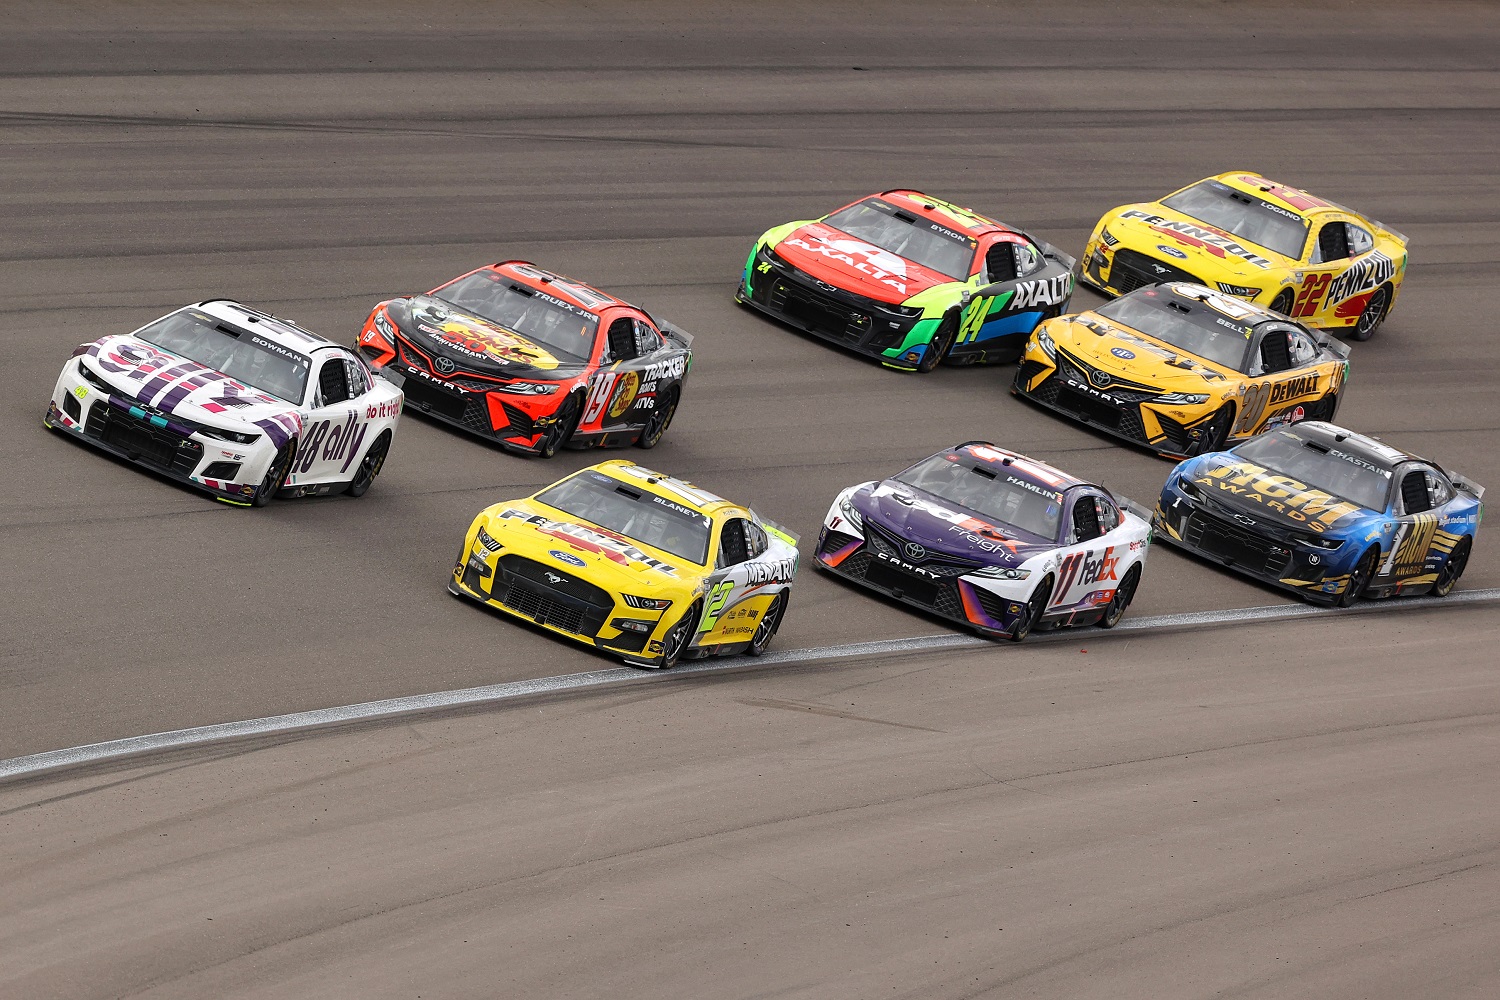 Ryan Blaney, Alex Bowman, and Joe Gibbs Racing's Martin Triex Jr. and Denny Hamlin lead the way during the NASCAR Cup Series Pennzoil 400 at Las Vegas Motor Speedway on March 6, 2022.